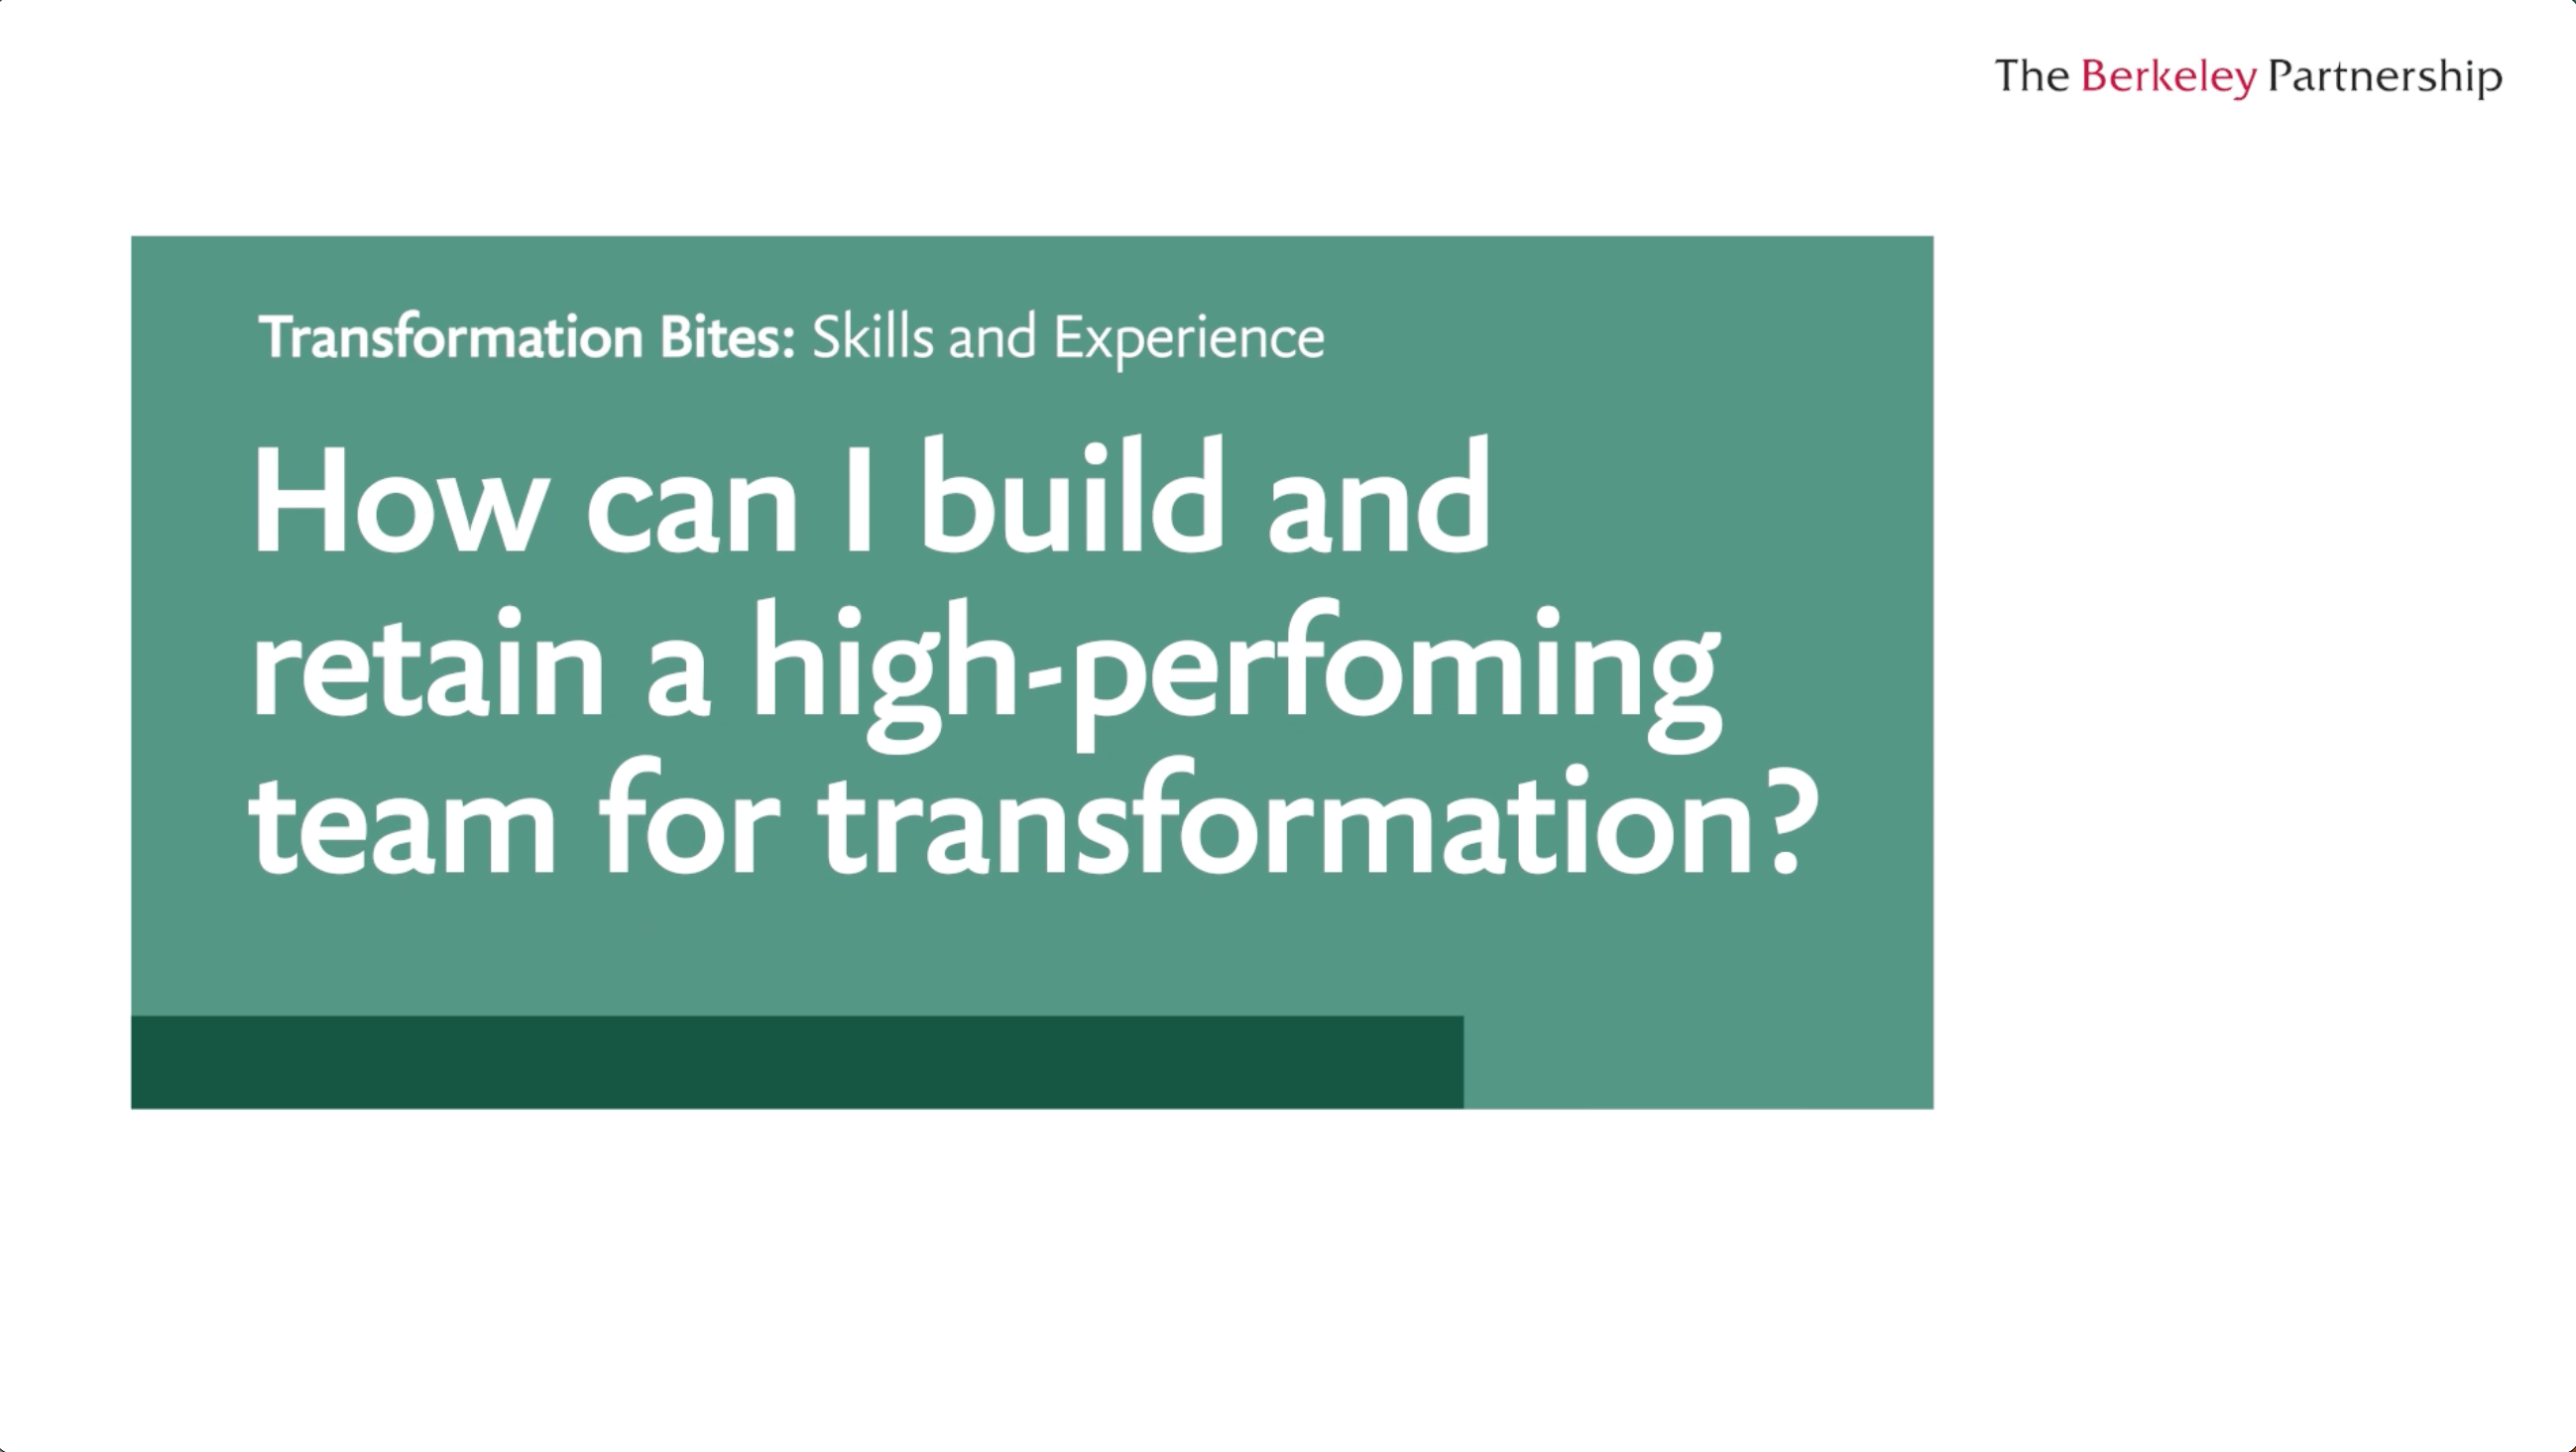 How can I build and retain a high performing team for transformation?